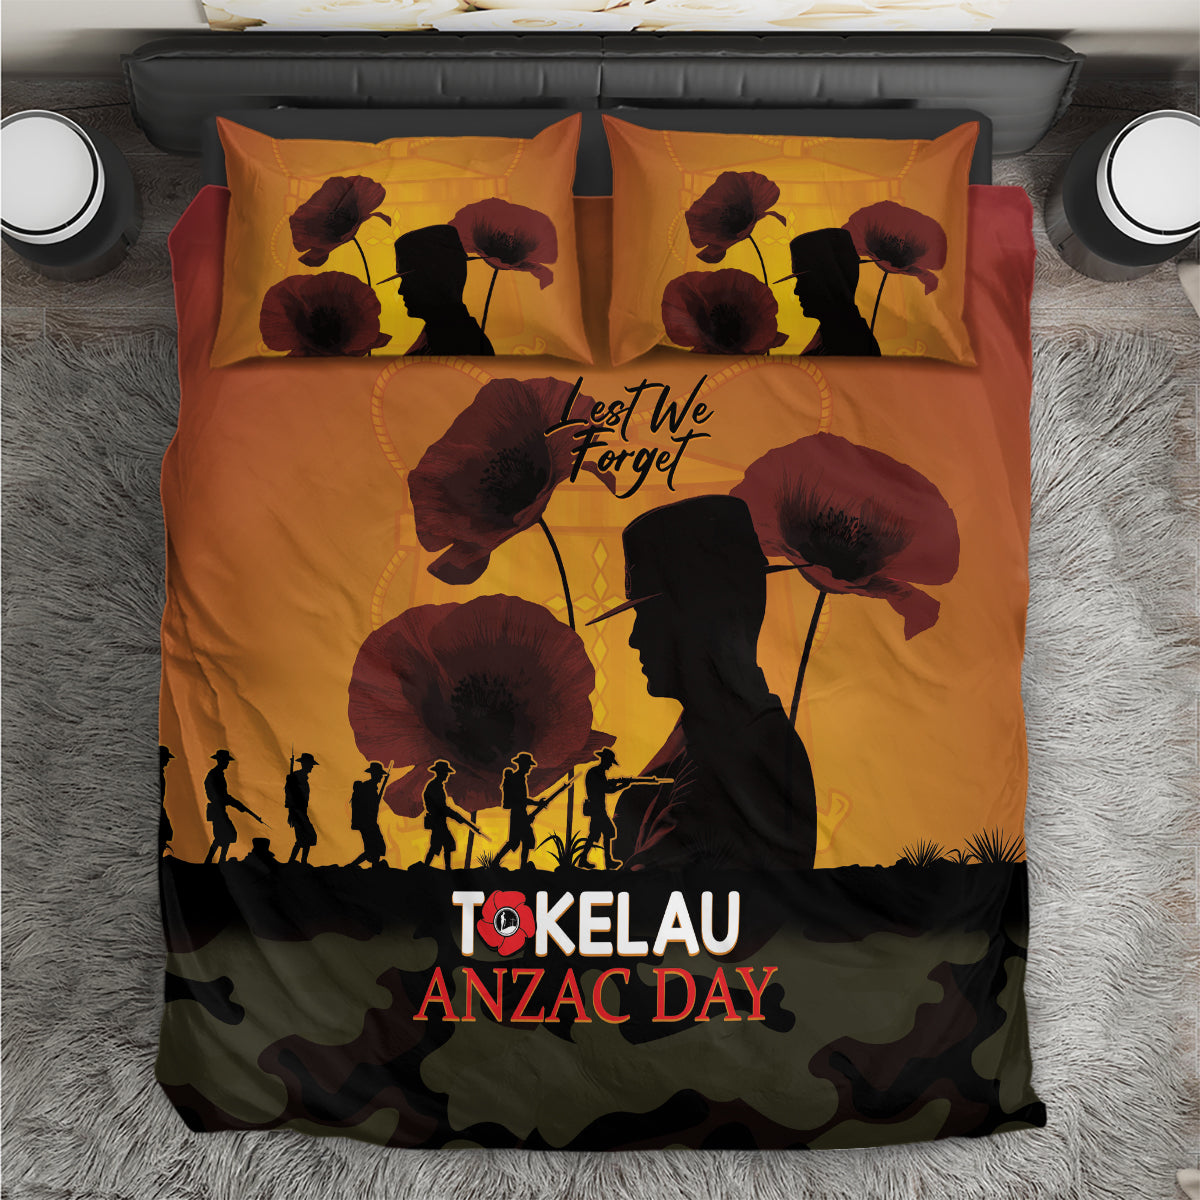 Tokelau ANZAC Day Bedding Set Camouflage With Poppies Lest We Forget LT14 Yellow - Polynesian Pride